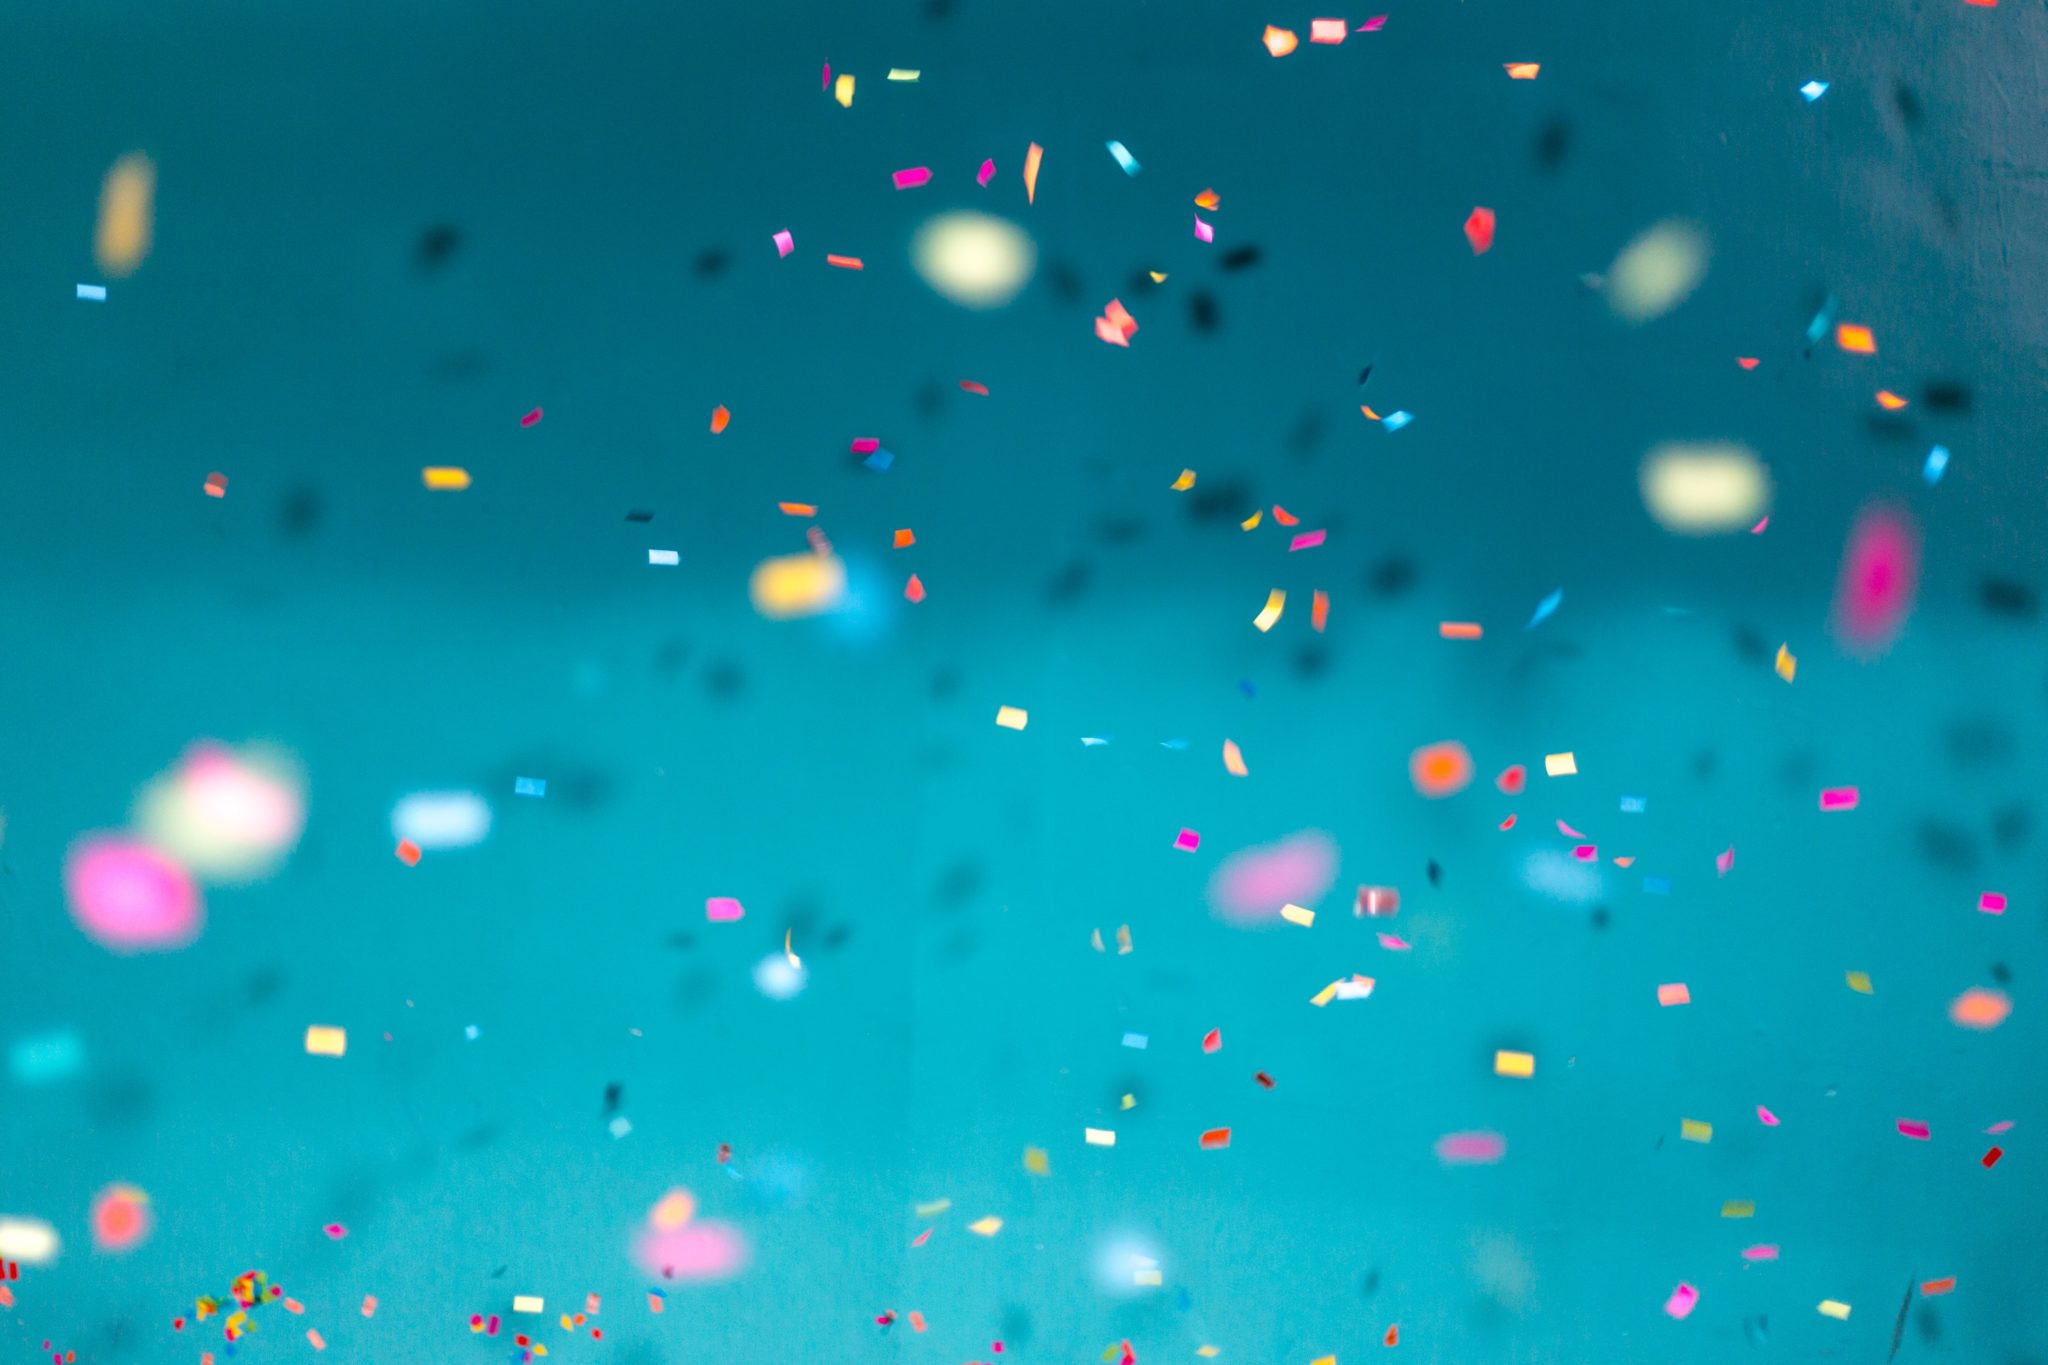 Colorful confetti floating against a blue background during a celebration.